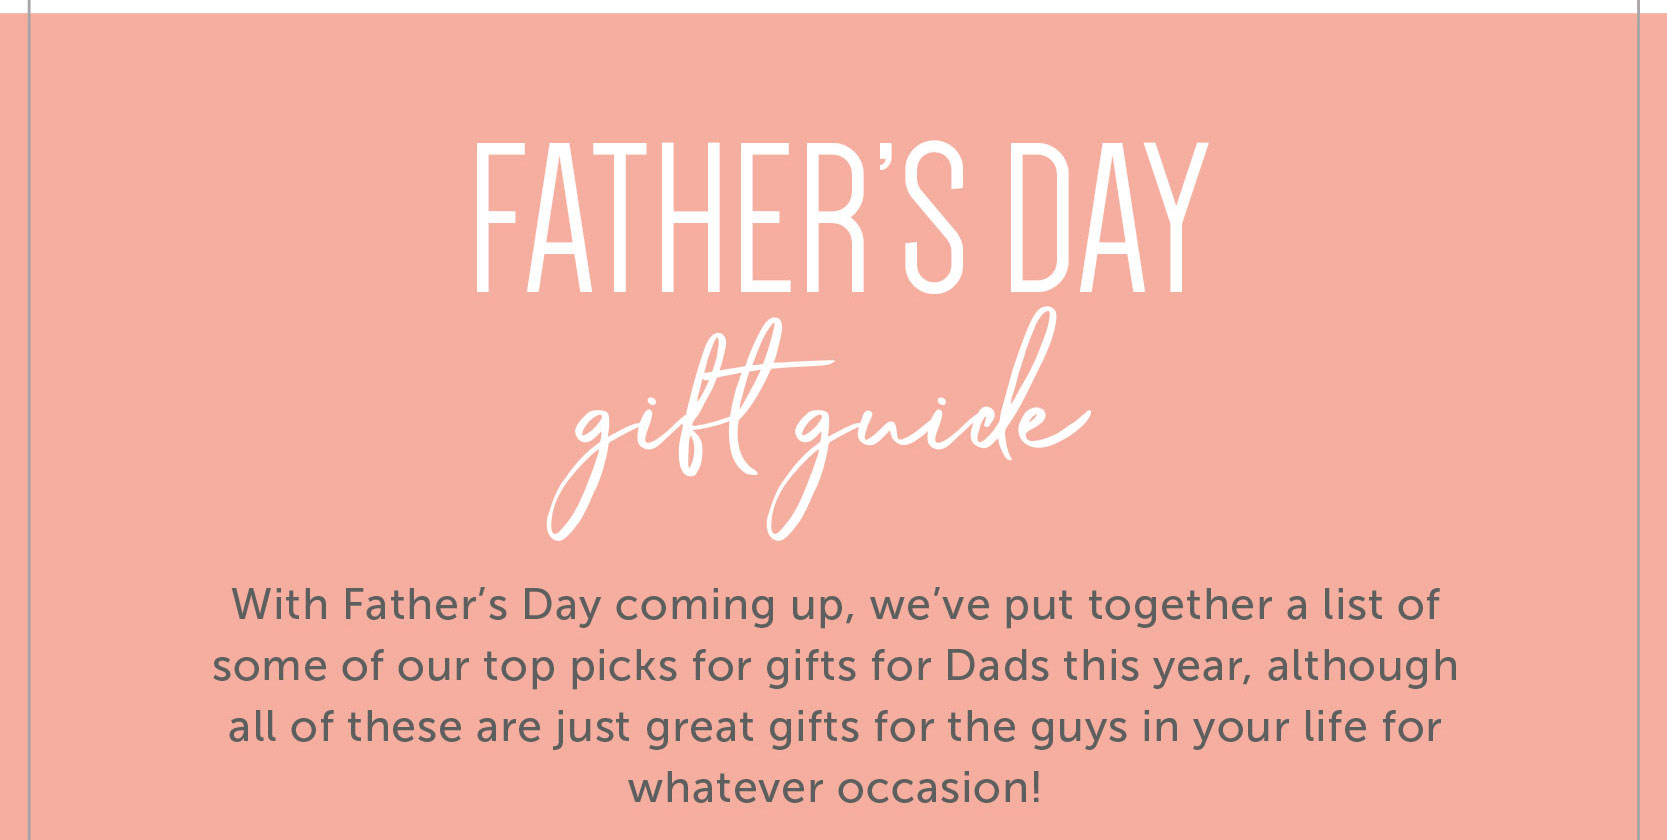 Father's Day Gift Guide. With Father's Day coming up, we've put together a list of some of our top picks for gifts for Dads this year, although all of these are just great gifts for the guys in your life for whatever occasion!